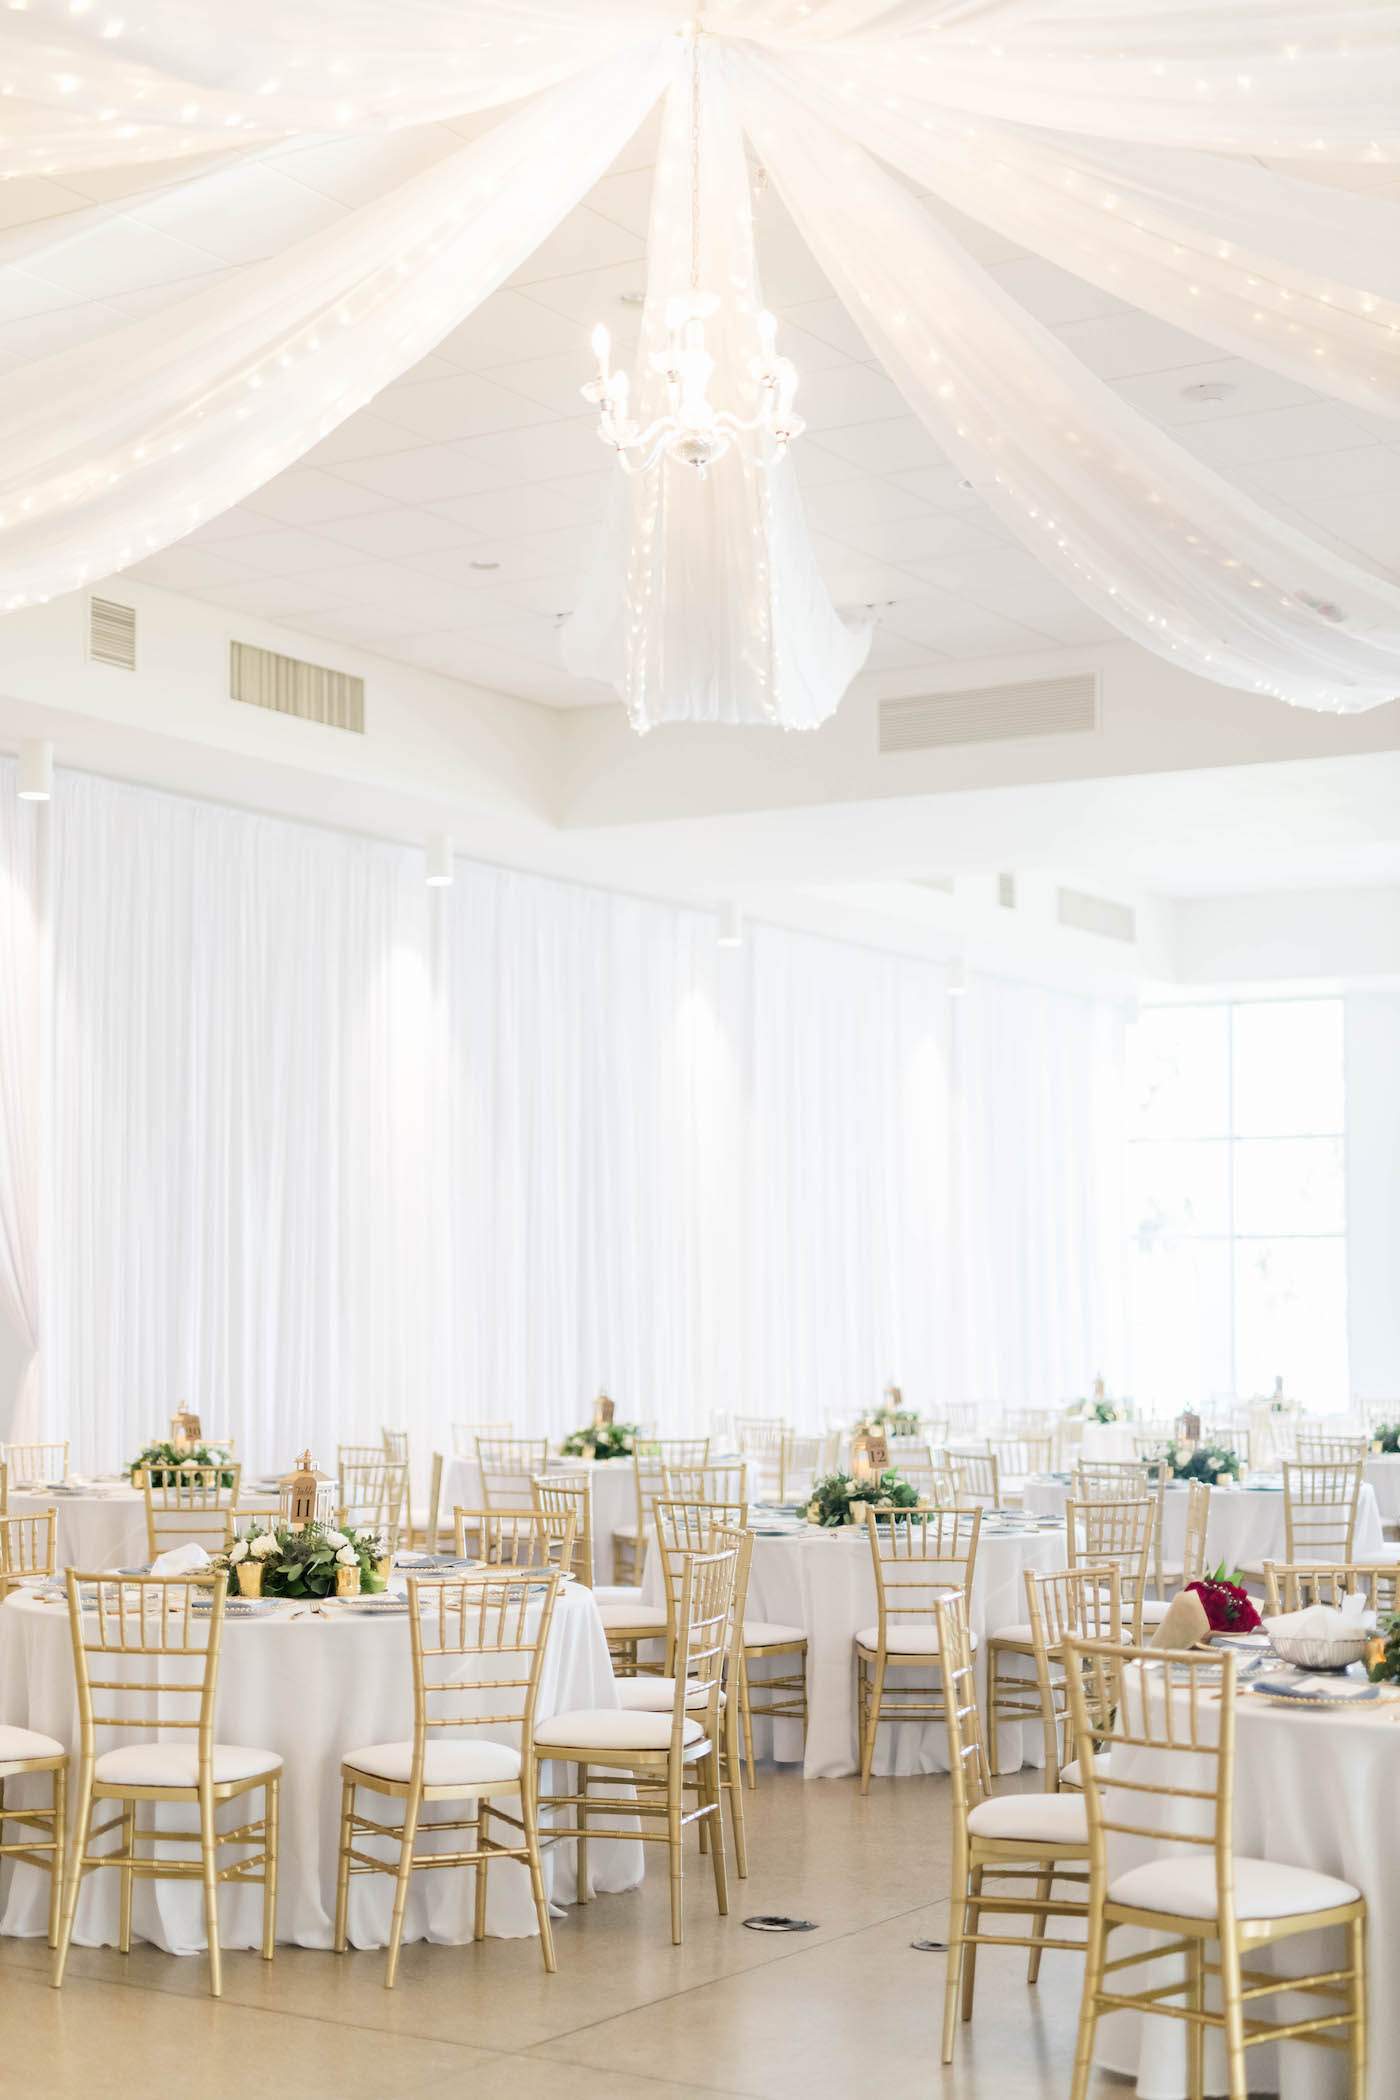 Tampa Wedding Venue the Tampa Garden Club Indoor Reception with Pipe and Drape and Ceiling Draping and Twinkle Lights | Wedding Reception Tables with White Linens and Gold Chiavari Chairs and Low Greenery Centerpieces | Gabro Event Services